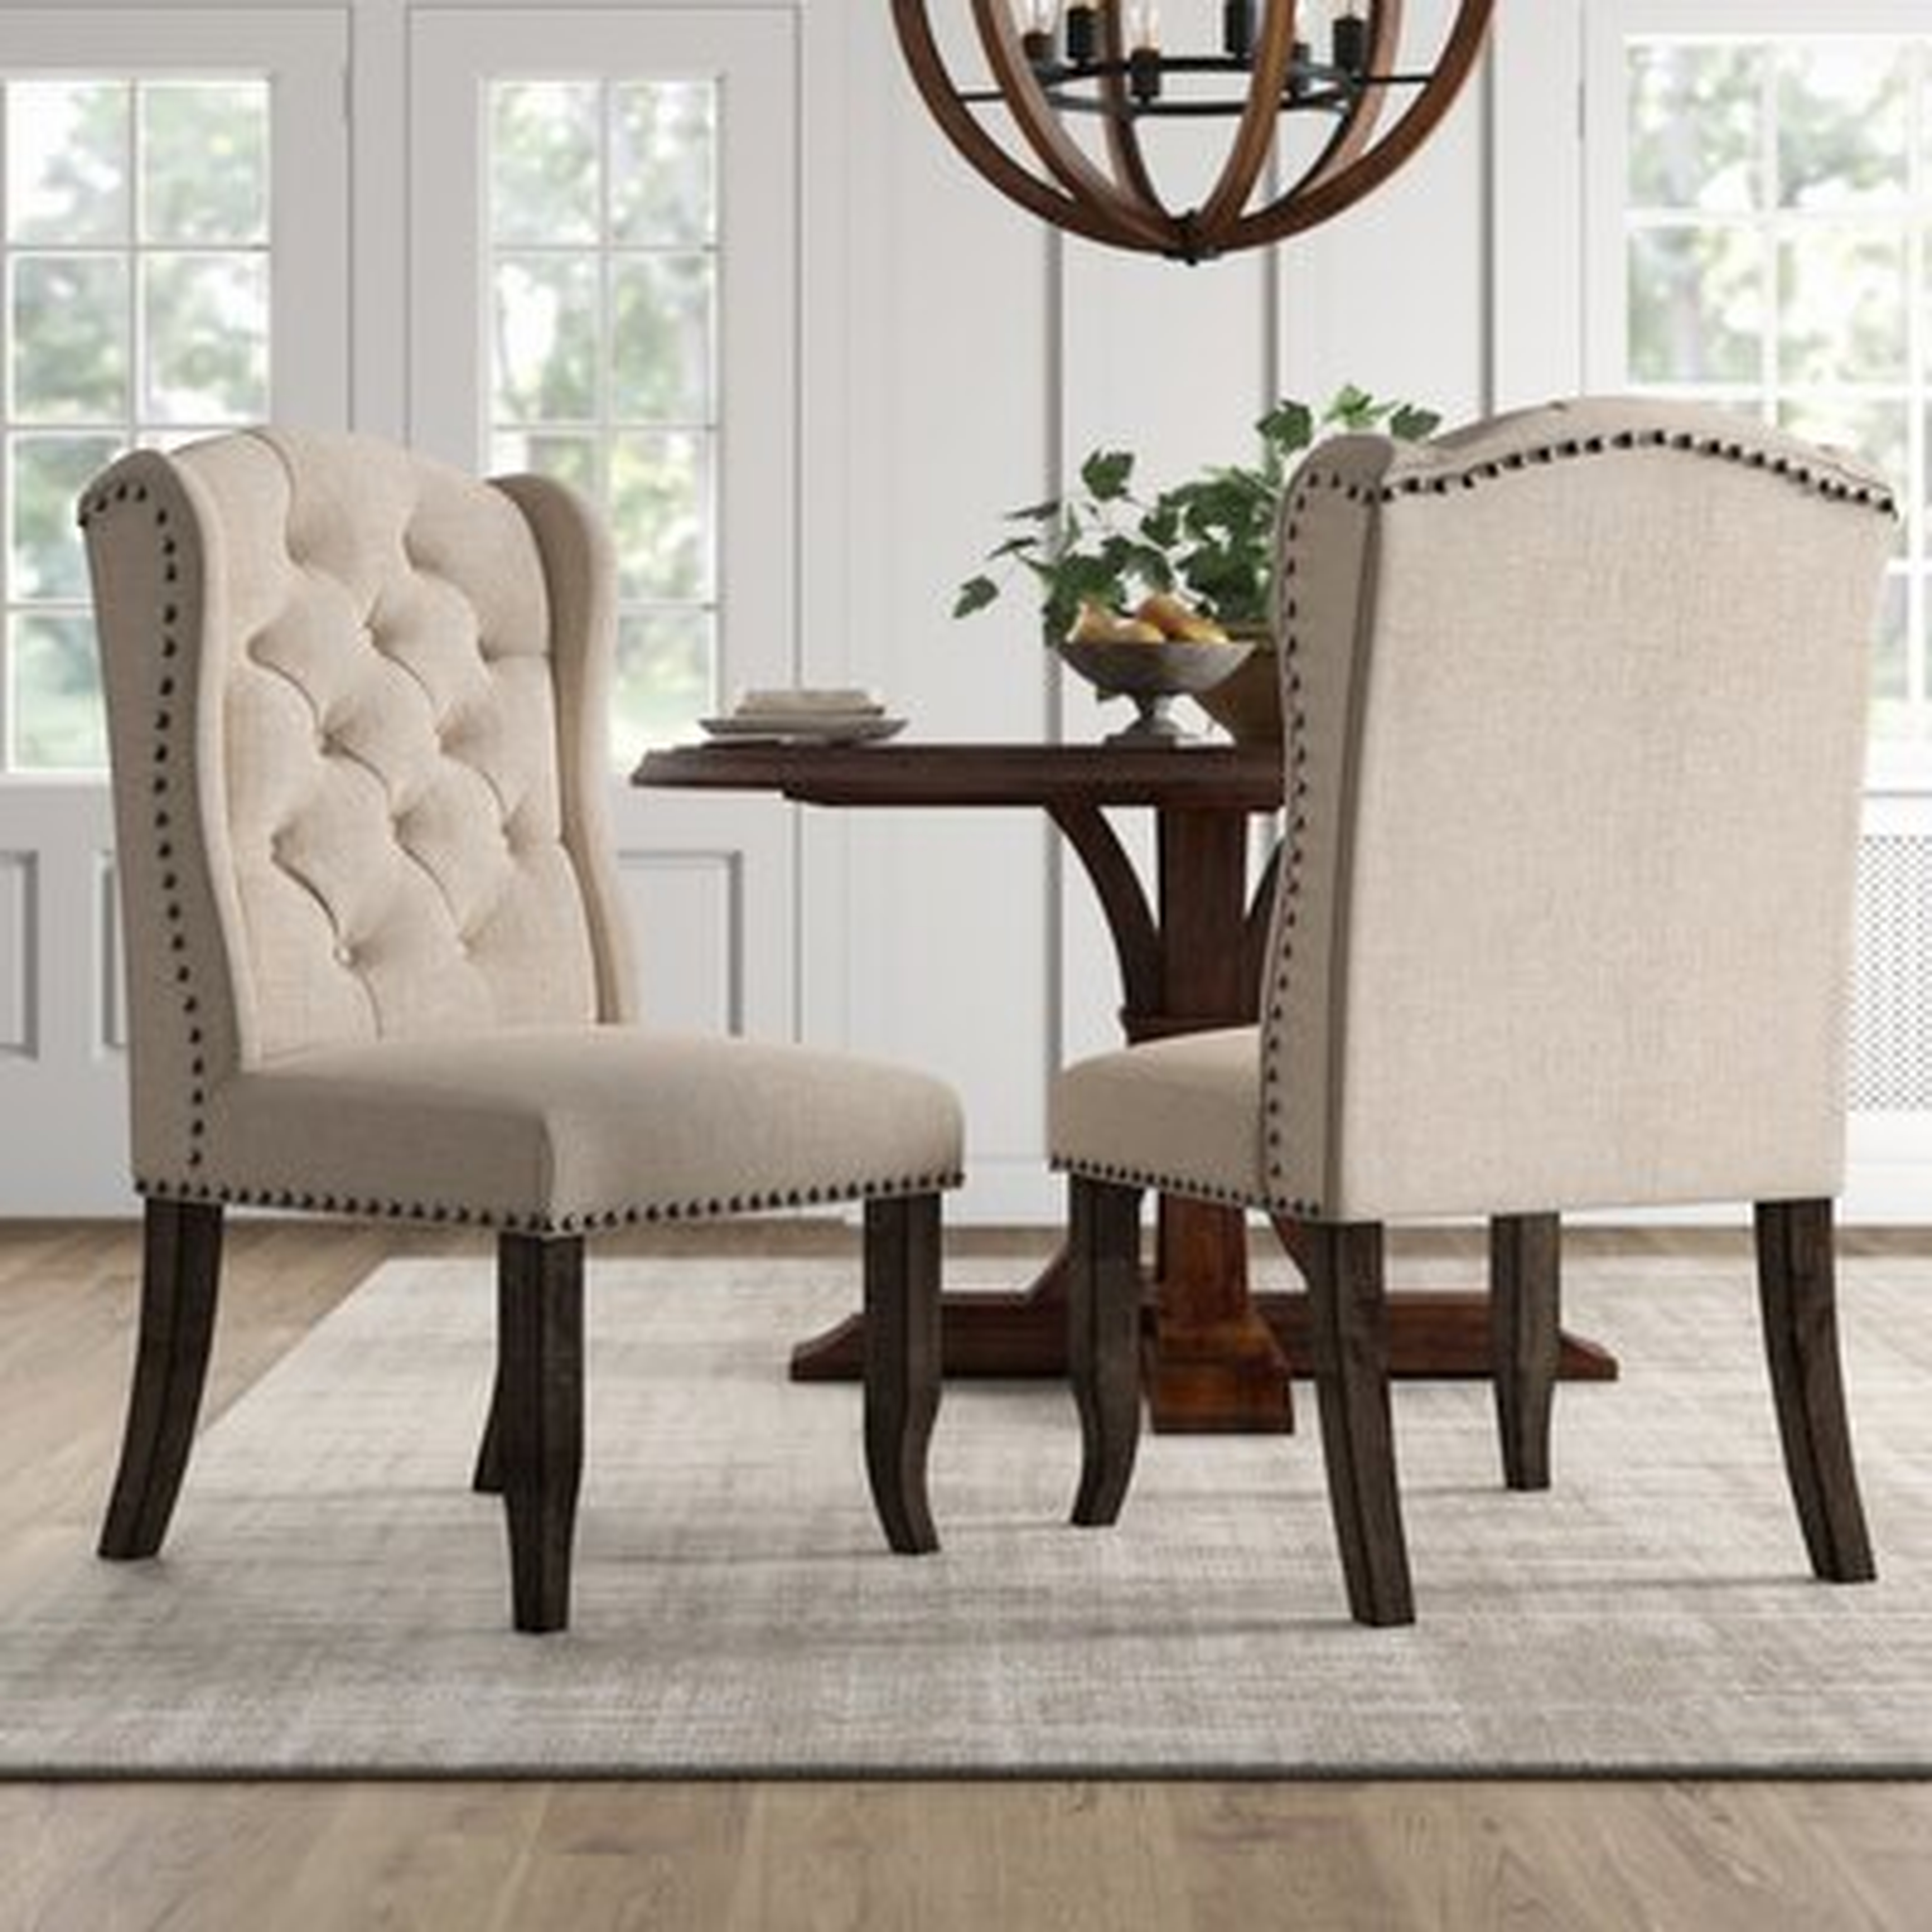 Calila Tufted Upholstered Wingback Side Chair in Beige (Set of 2) - Birch Lane